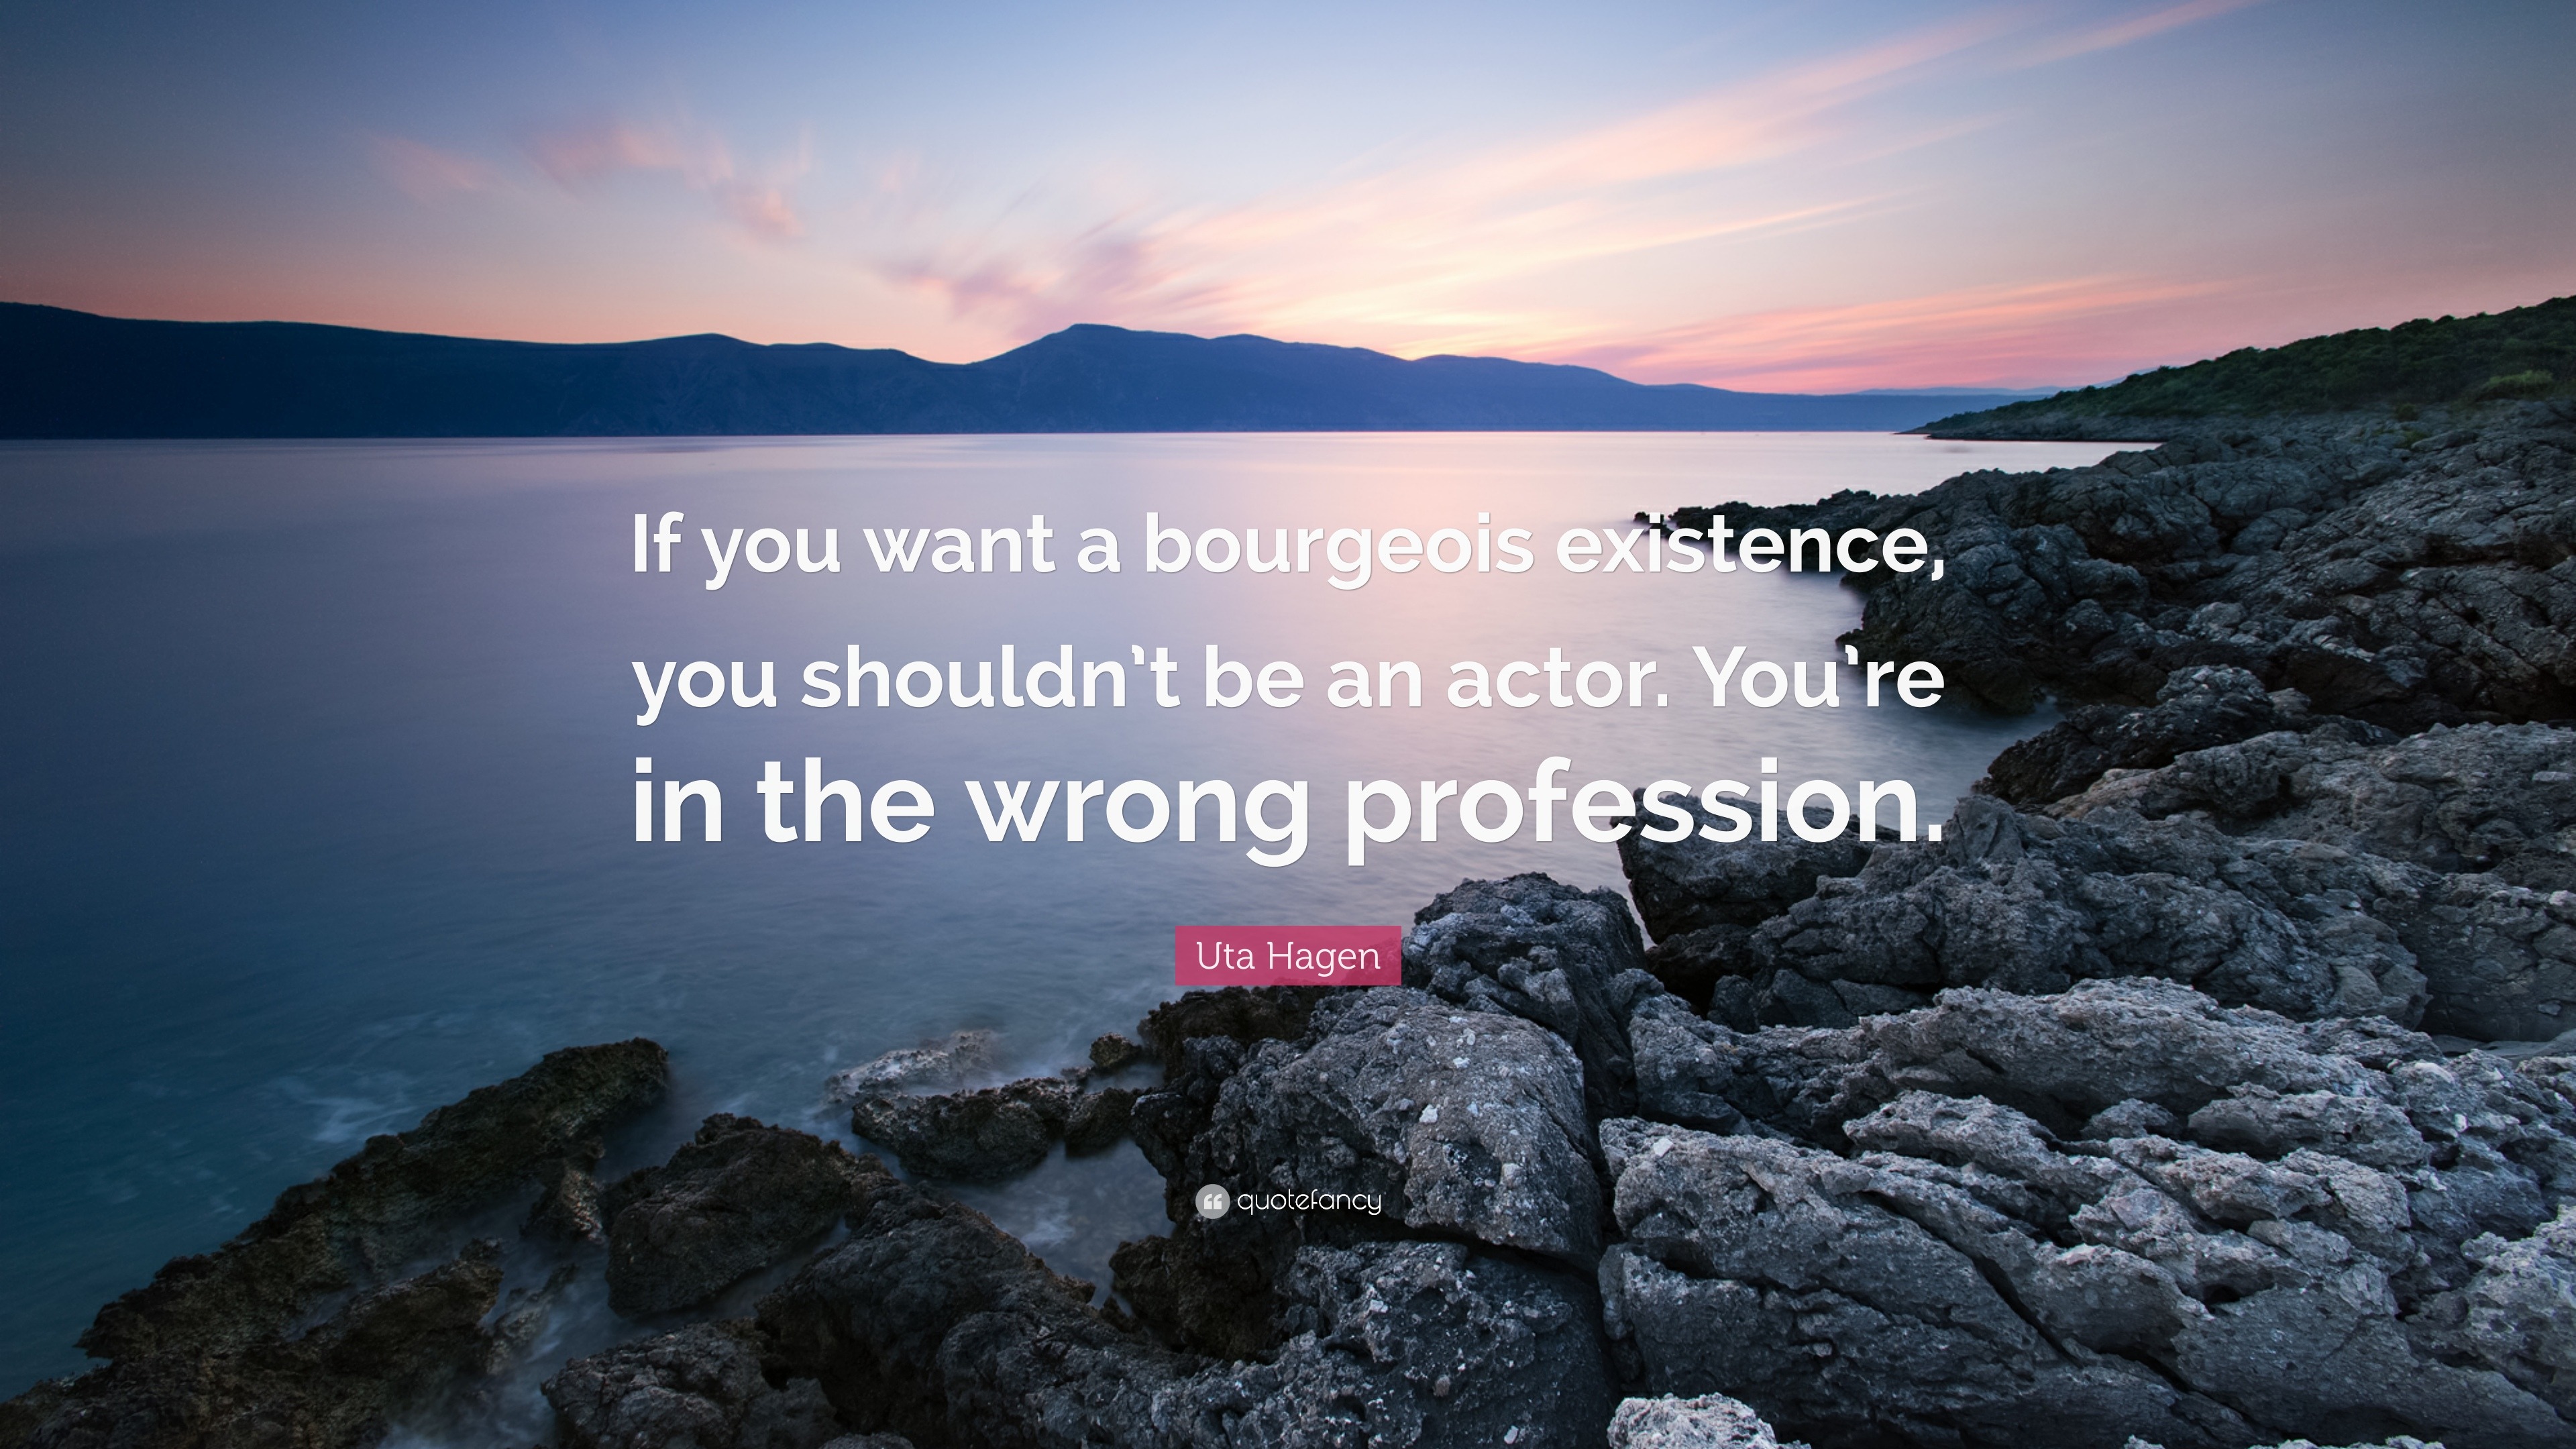 Uta Hagen Quote If You Want A Bourgeois Existence You Shouldn T Be An Actor You